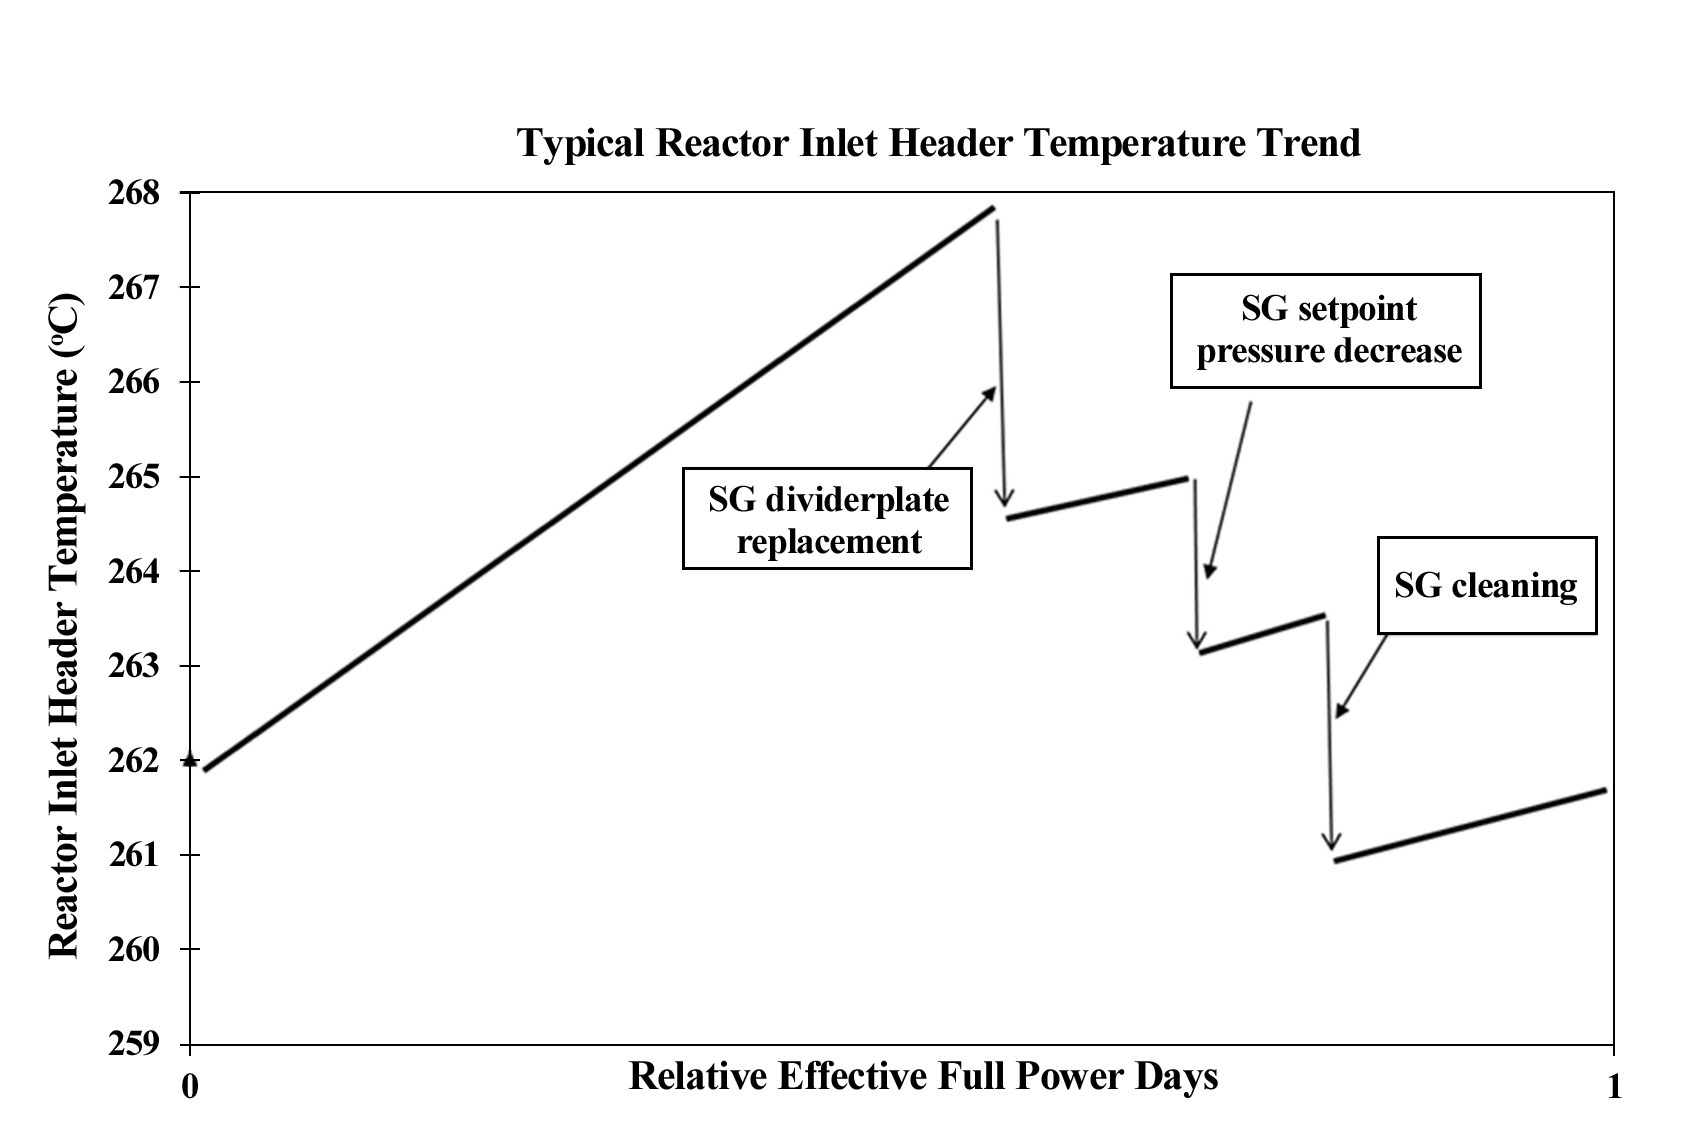 Typical Inlet Header Temperature History of a CANDU Plant at Full Power